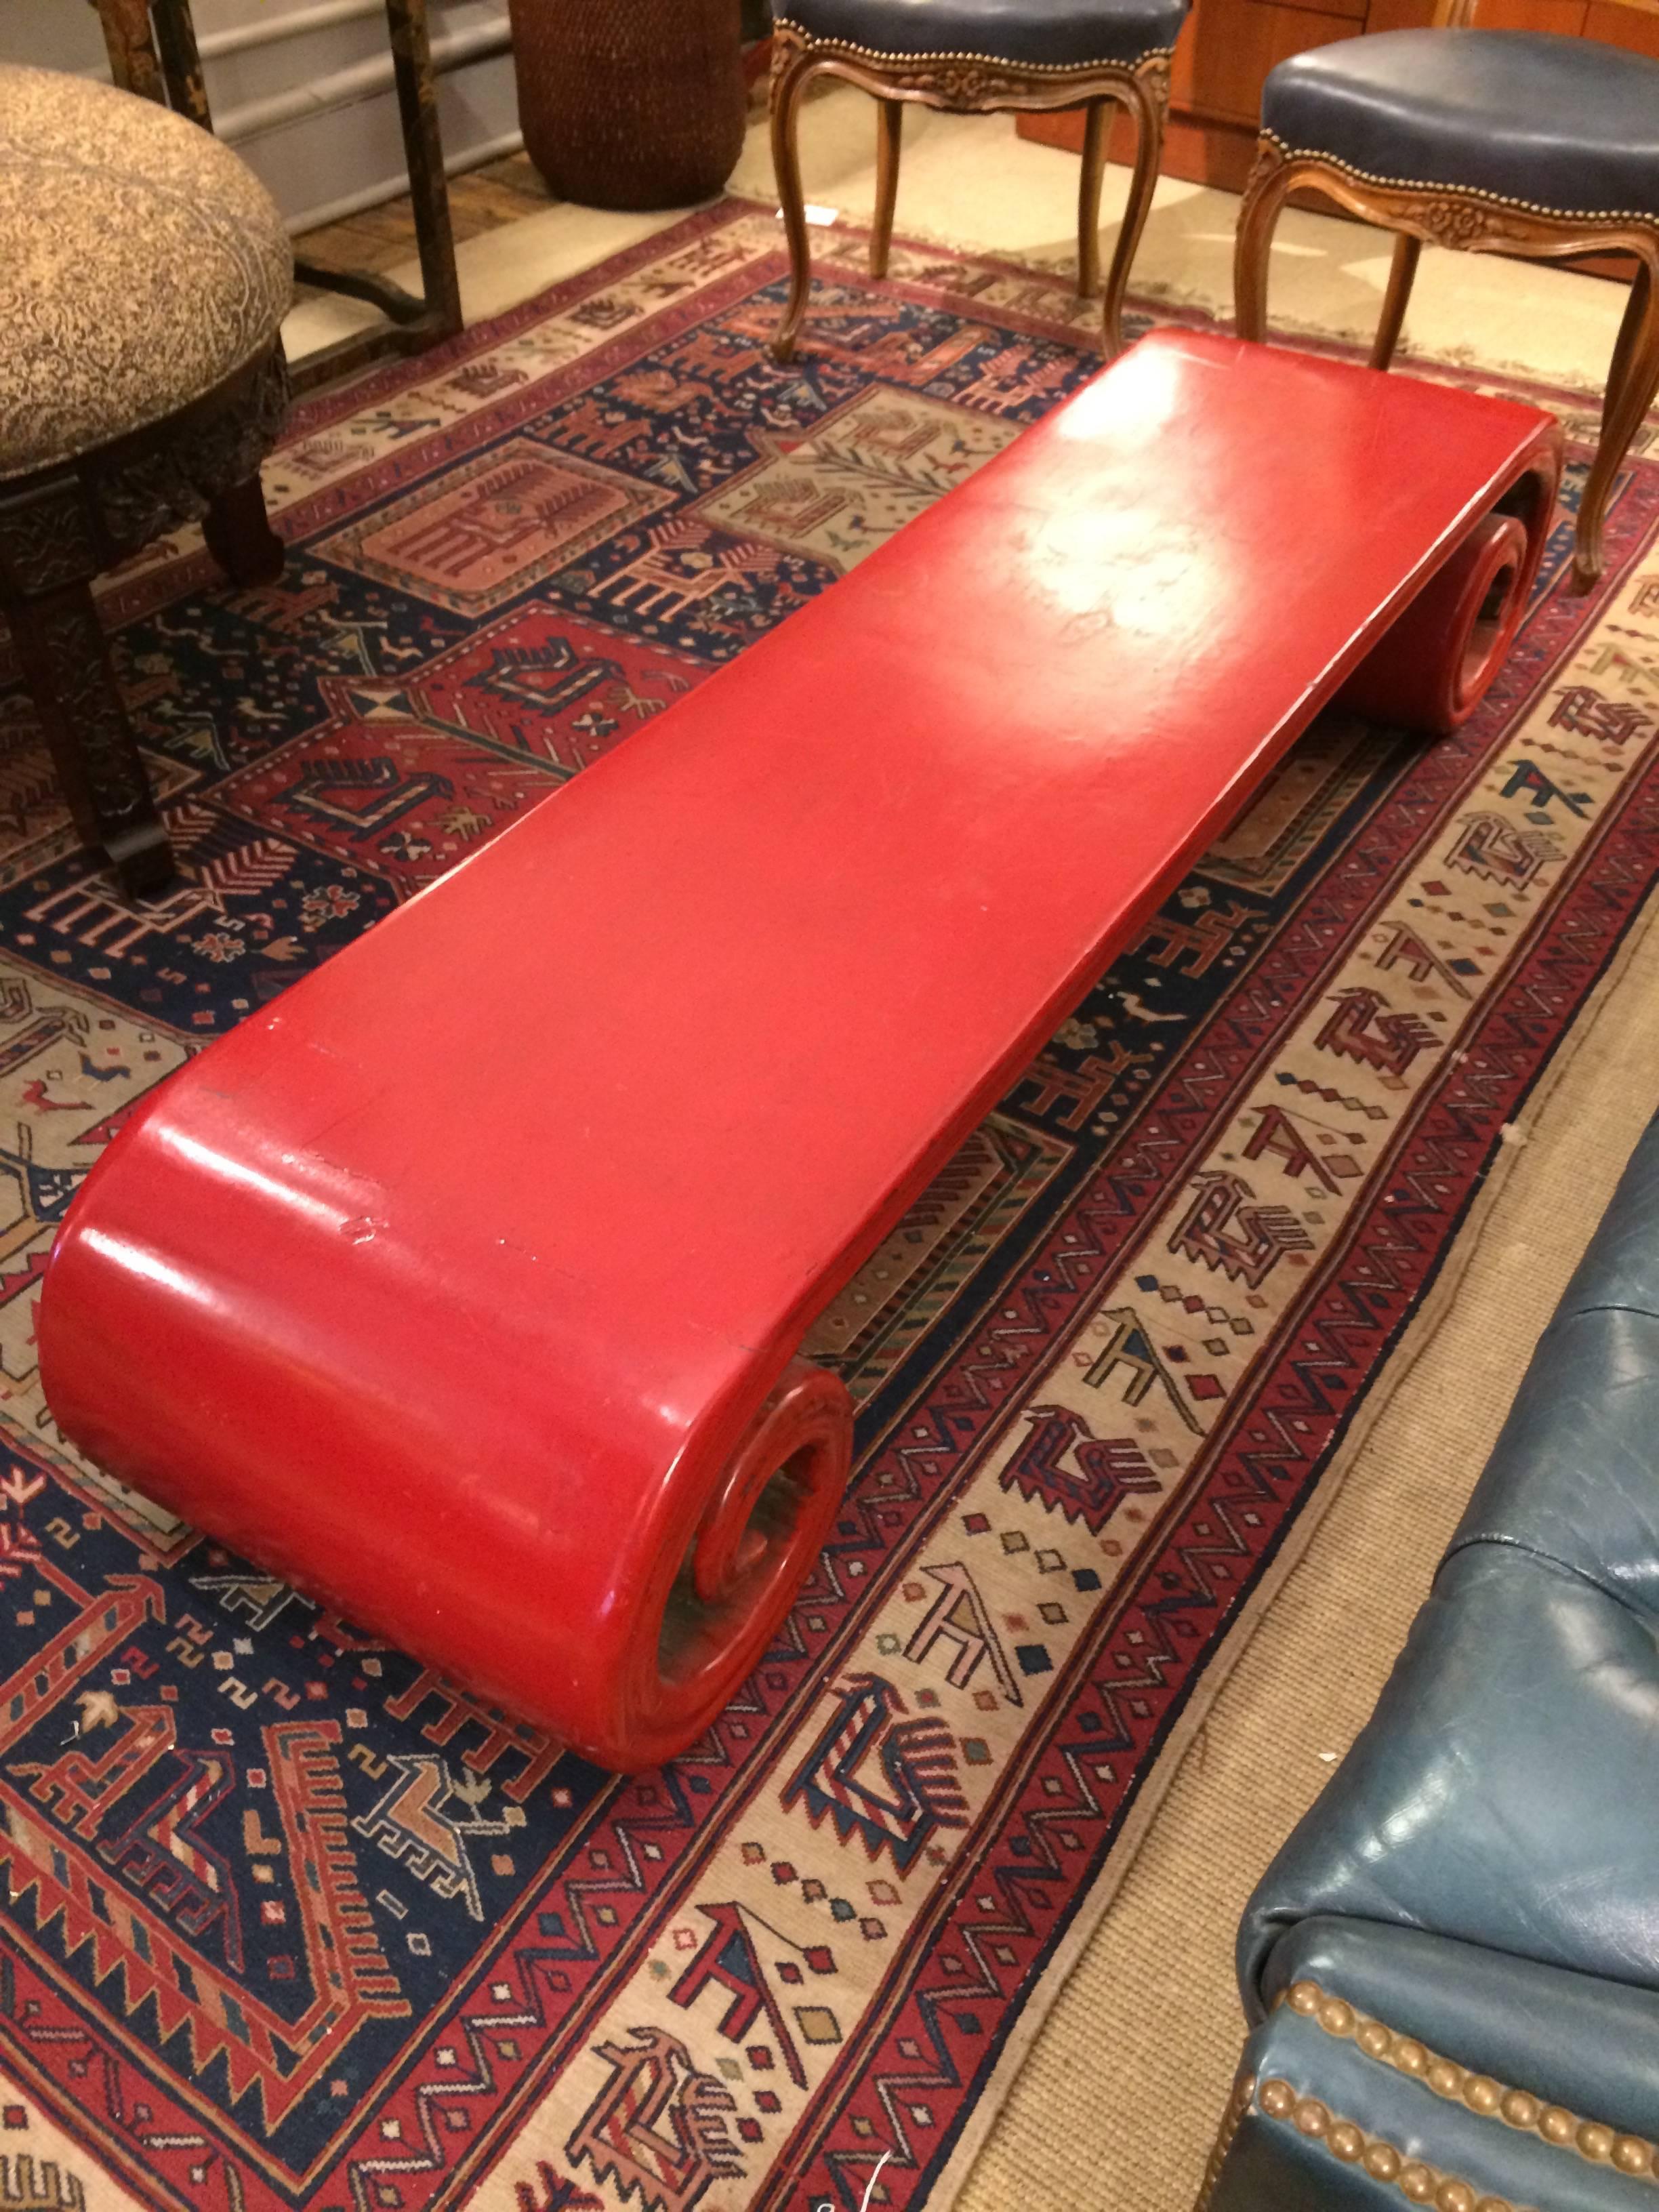 Rare coffee table with a scroll curlicue shape, painted wood in a bright tomato red. Low to the ground and sensually sculptural.